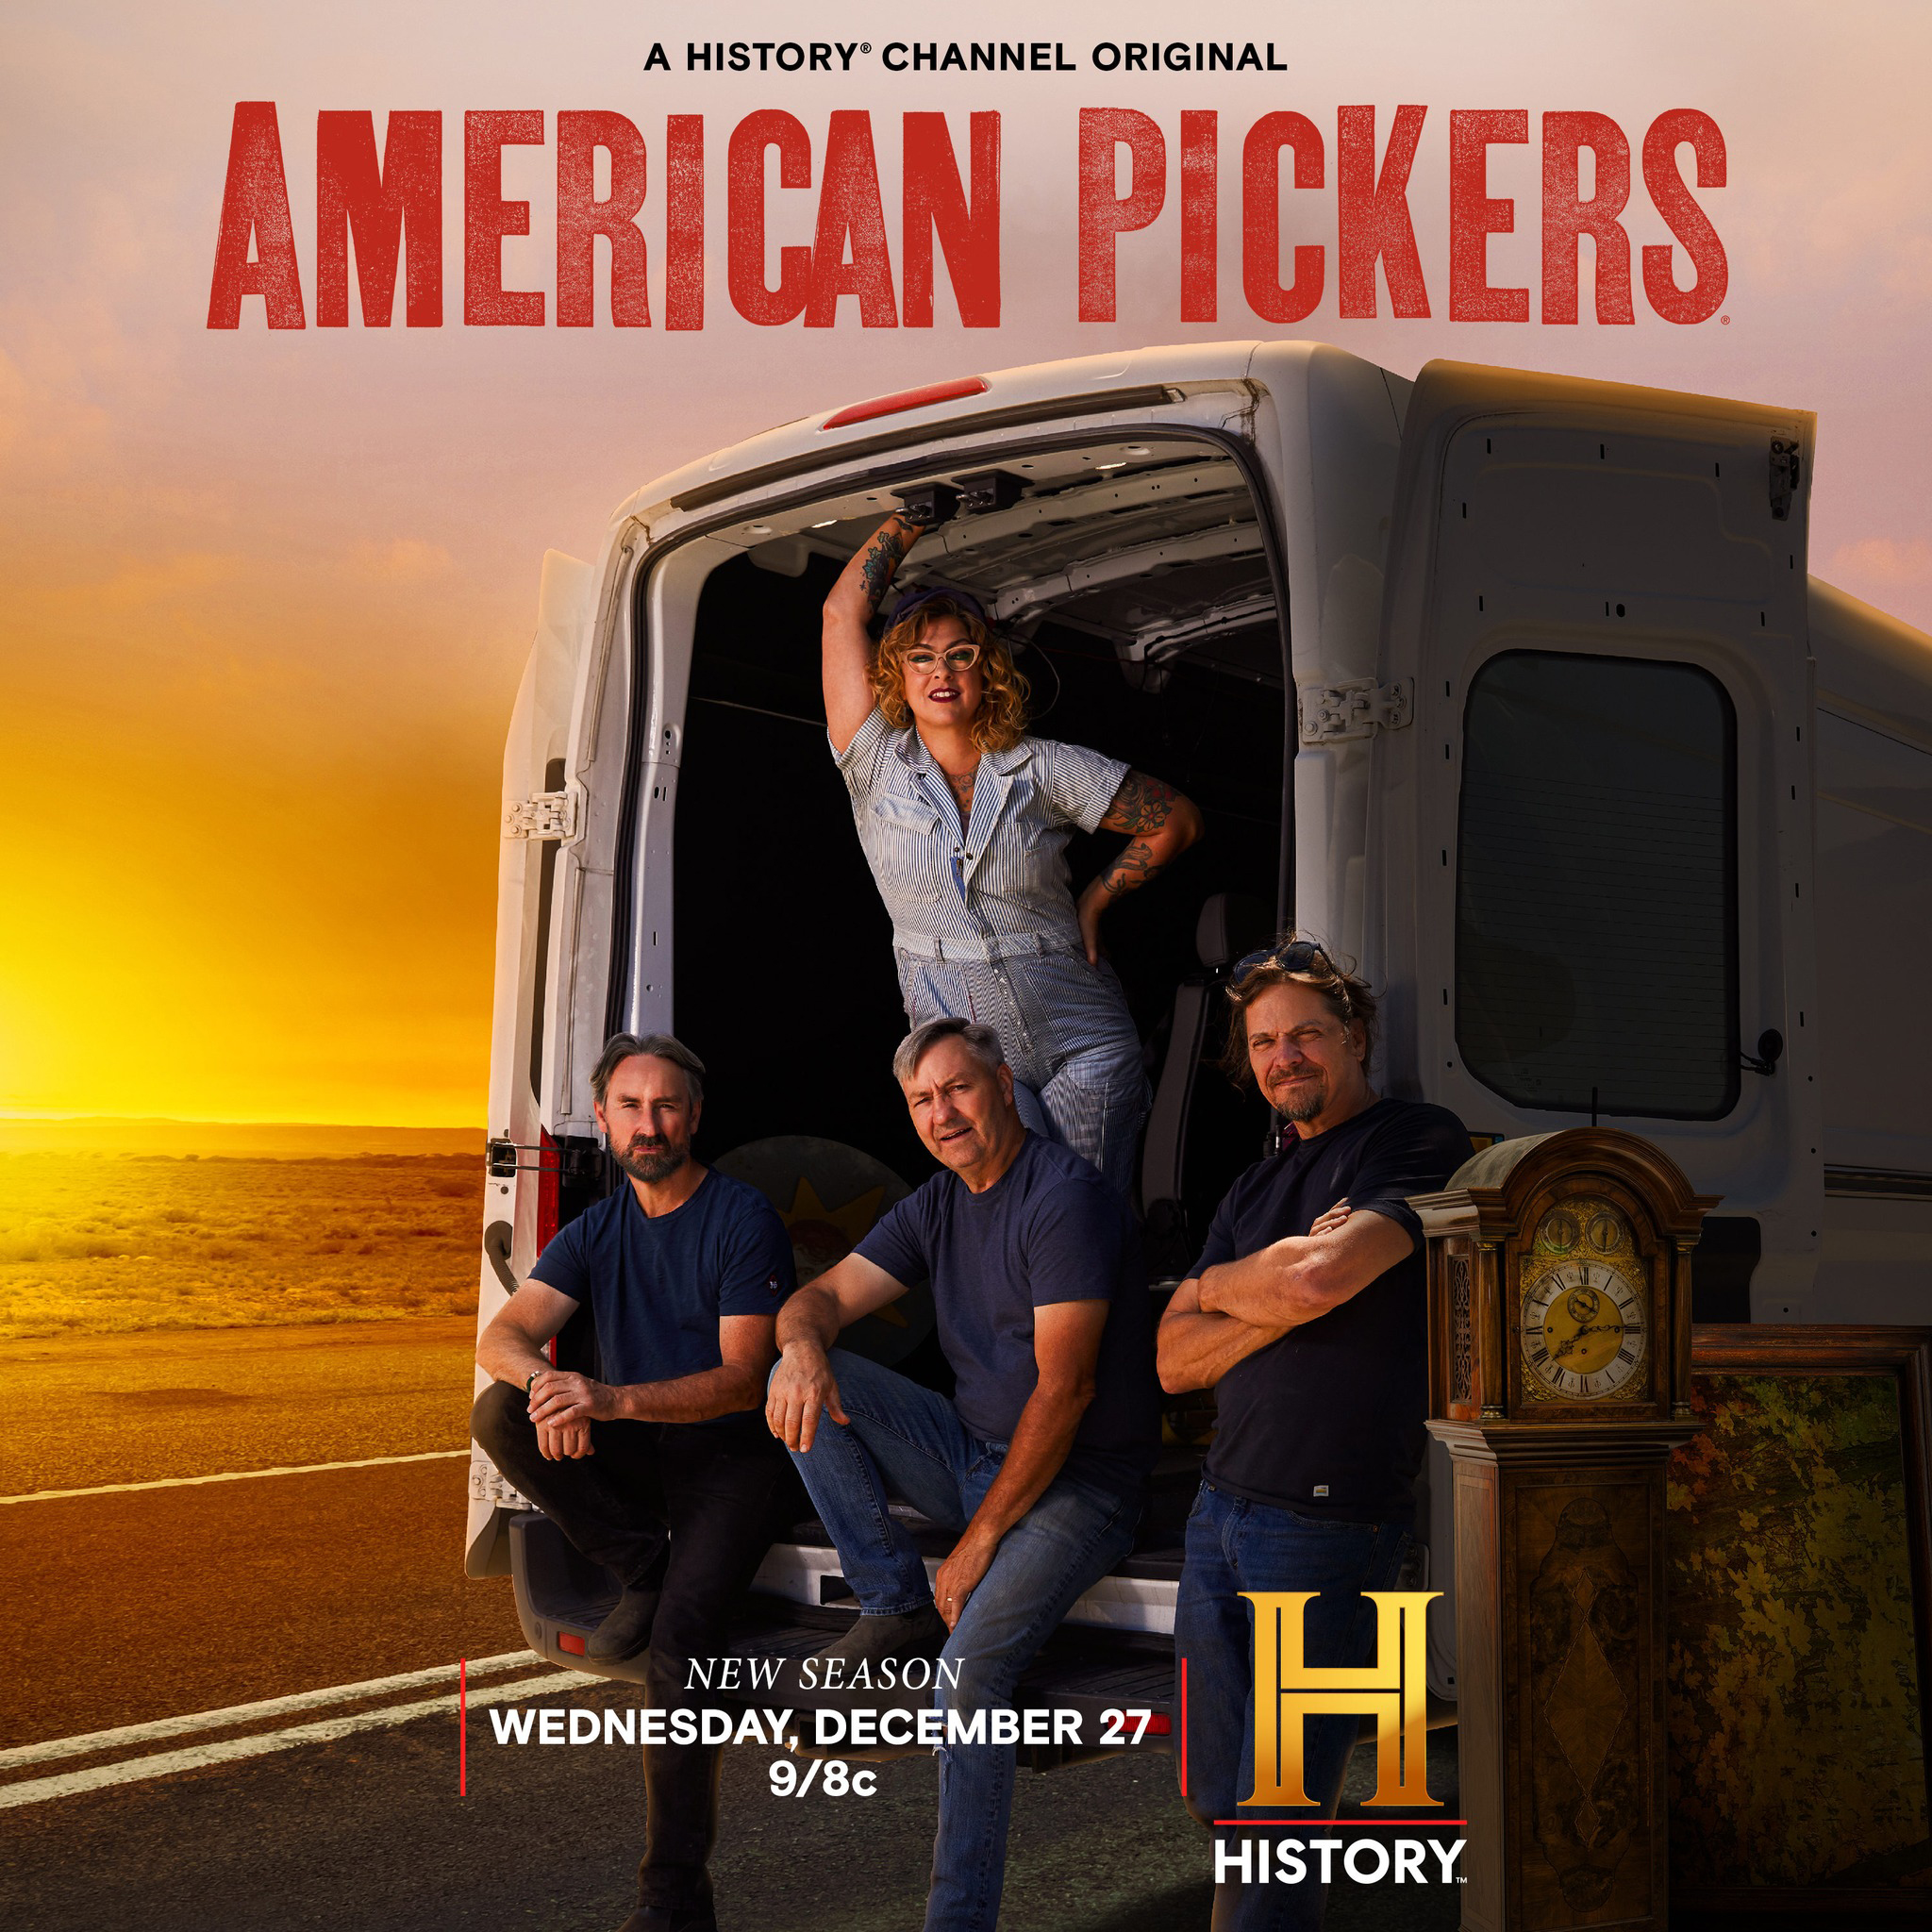 Mike pictured with Robbie Wolfe, Danielle Colby, and Jon Salazy for an American Pickers promo